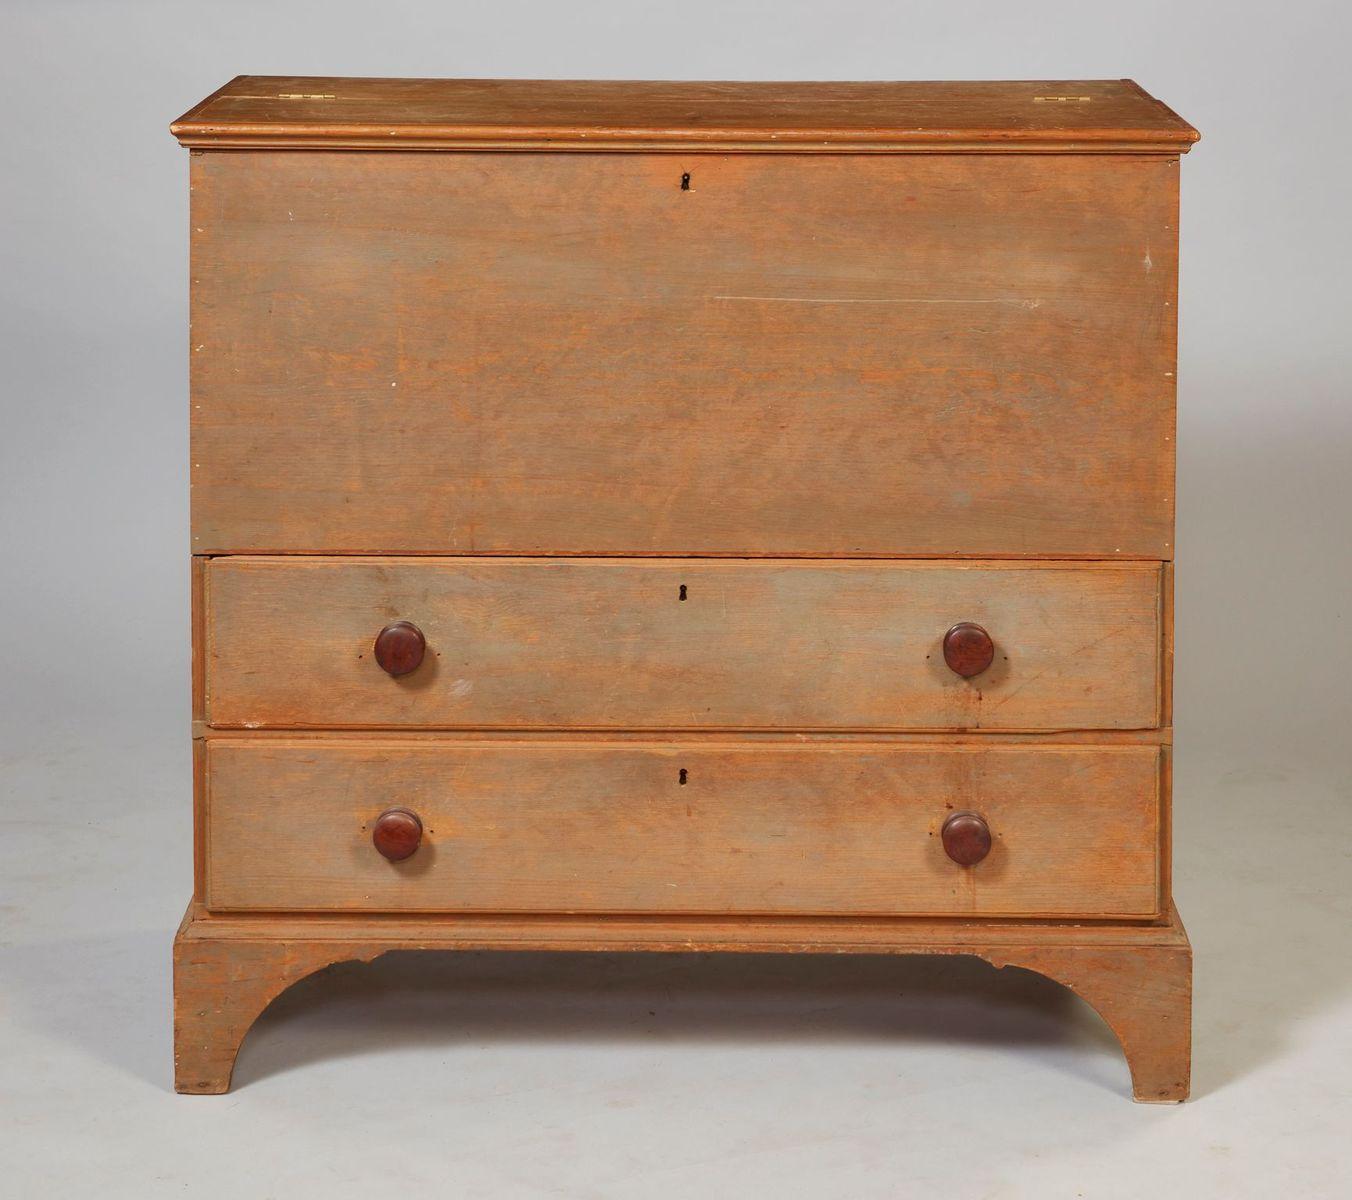 American early 19th century painted two drawer blanket chest with double hinged lid with ogee molded edge over simple case with two drawers having large turned walnut knobs and standing on simple but sculptural arched bracket feet, the whole